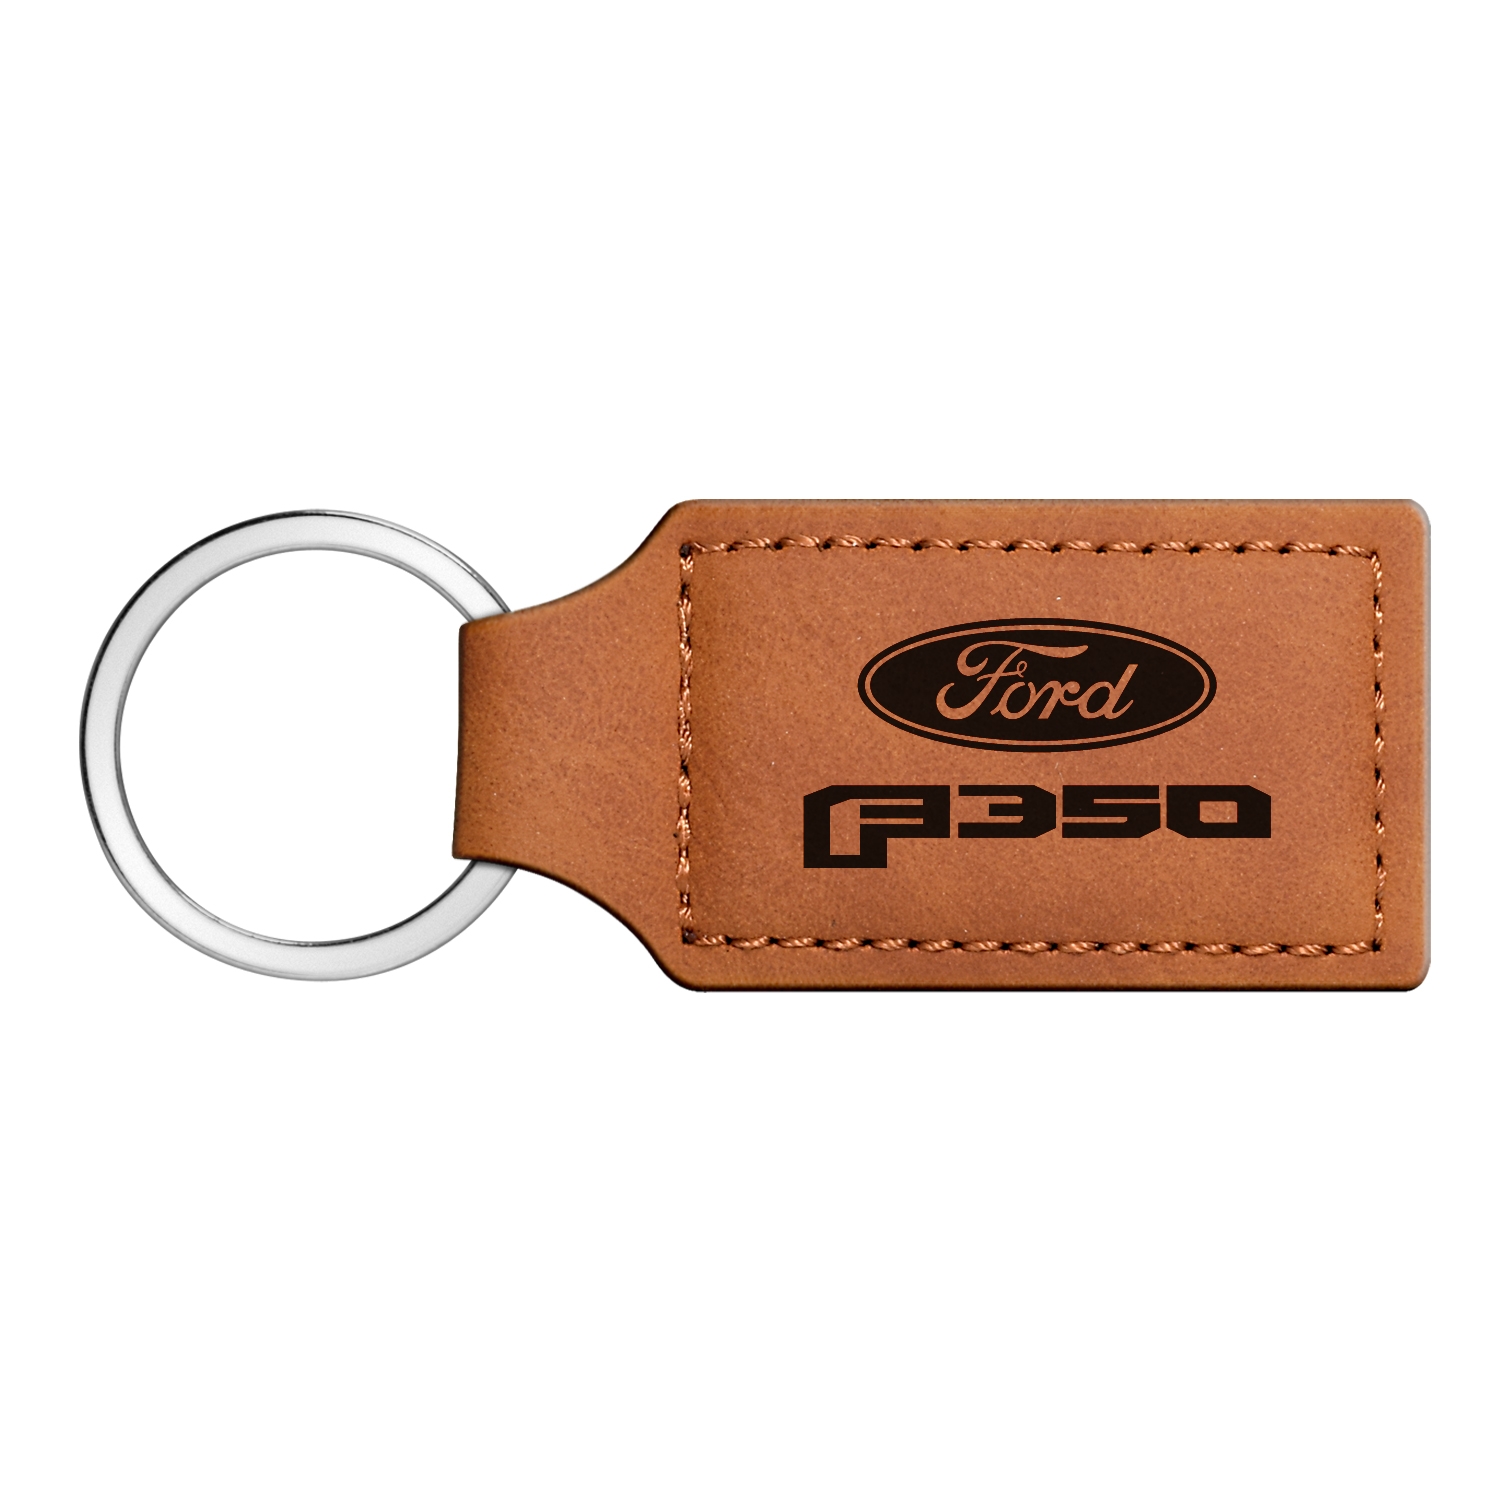 Ford F350 Rectangular Brown Leather Key Chain